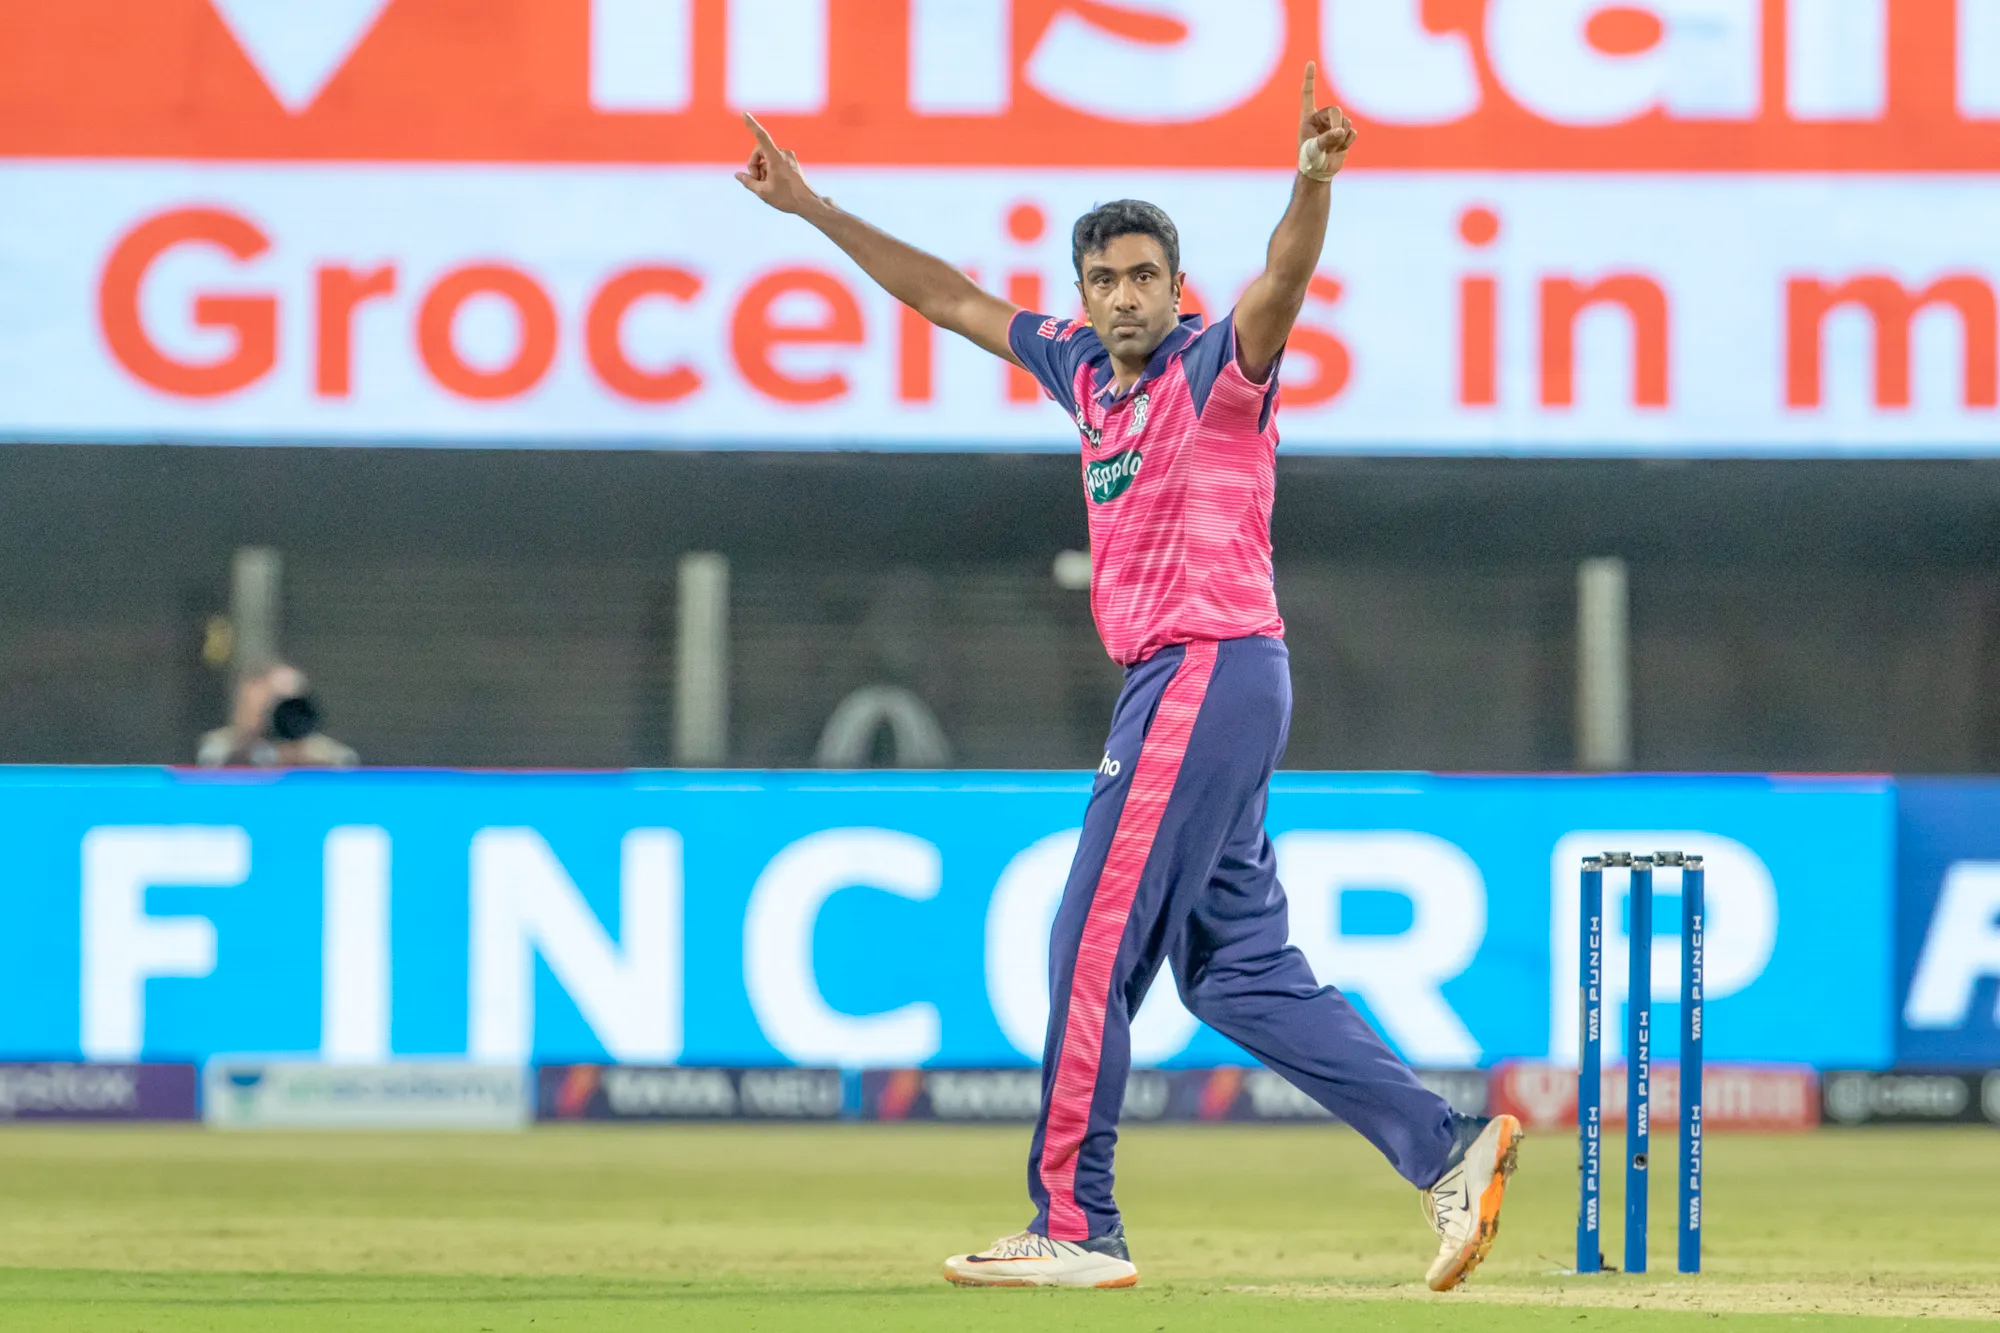 R Ashwin failed to take a single wicket in the IPL 15 Final | BCCI-IPL